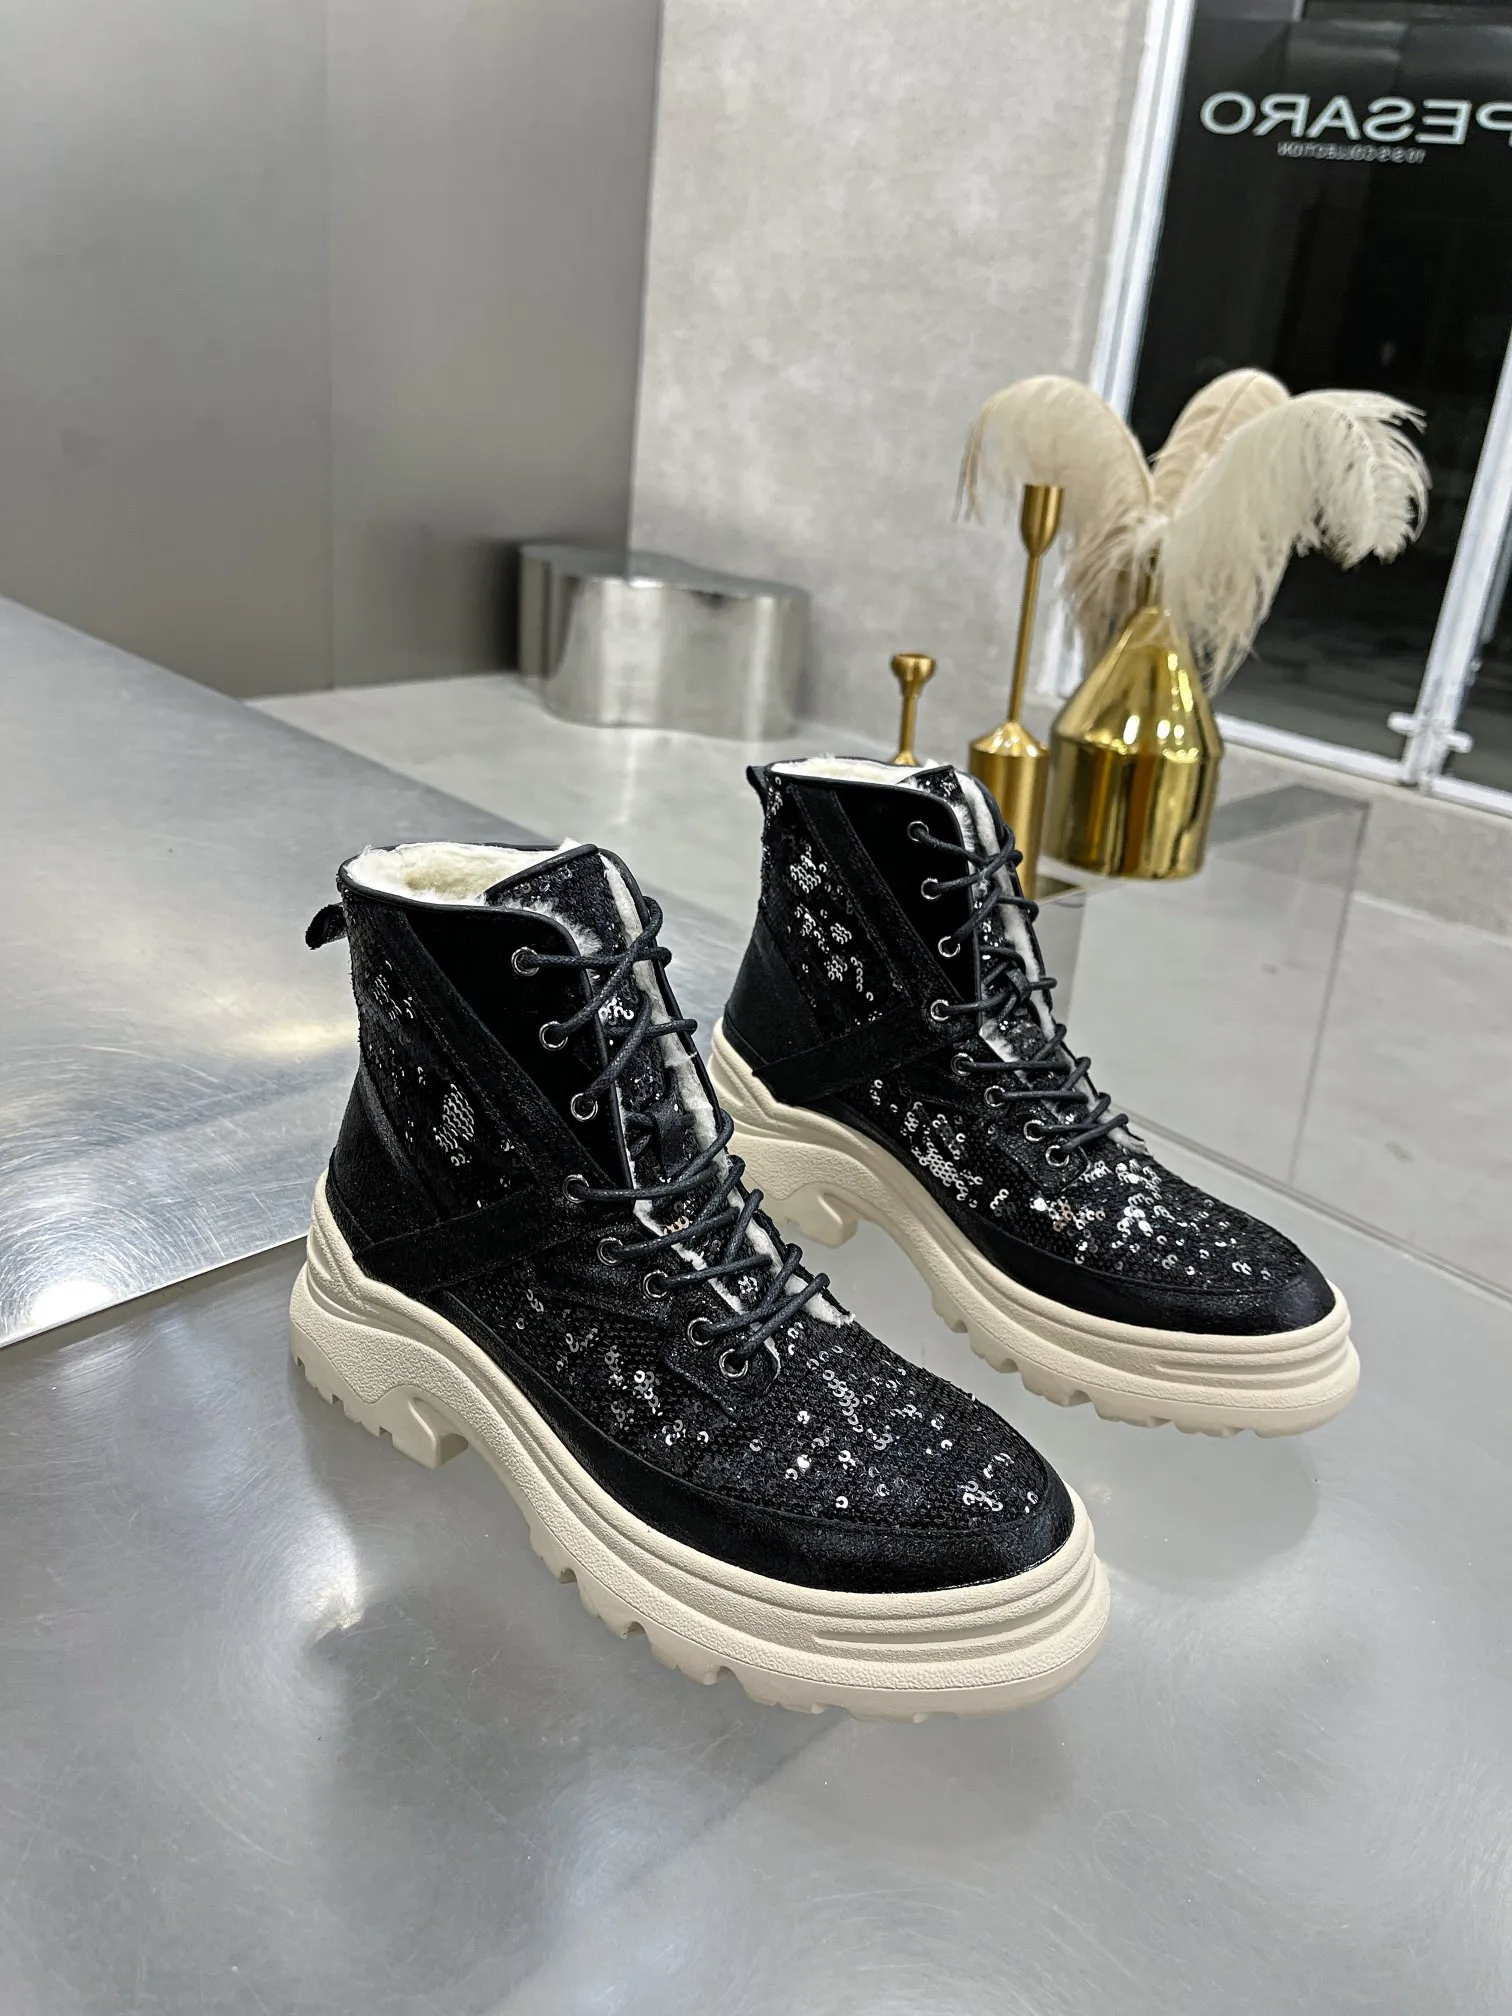 Winter Velvet and Thicken Shoes Versatile Flat Thermal Women's Short Boots Classic Glitter Ladies Gilrs Ankle Boot